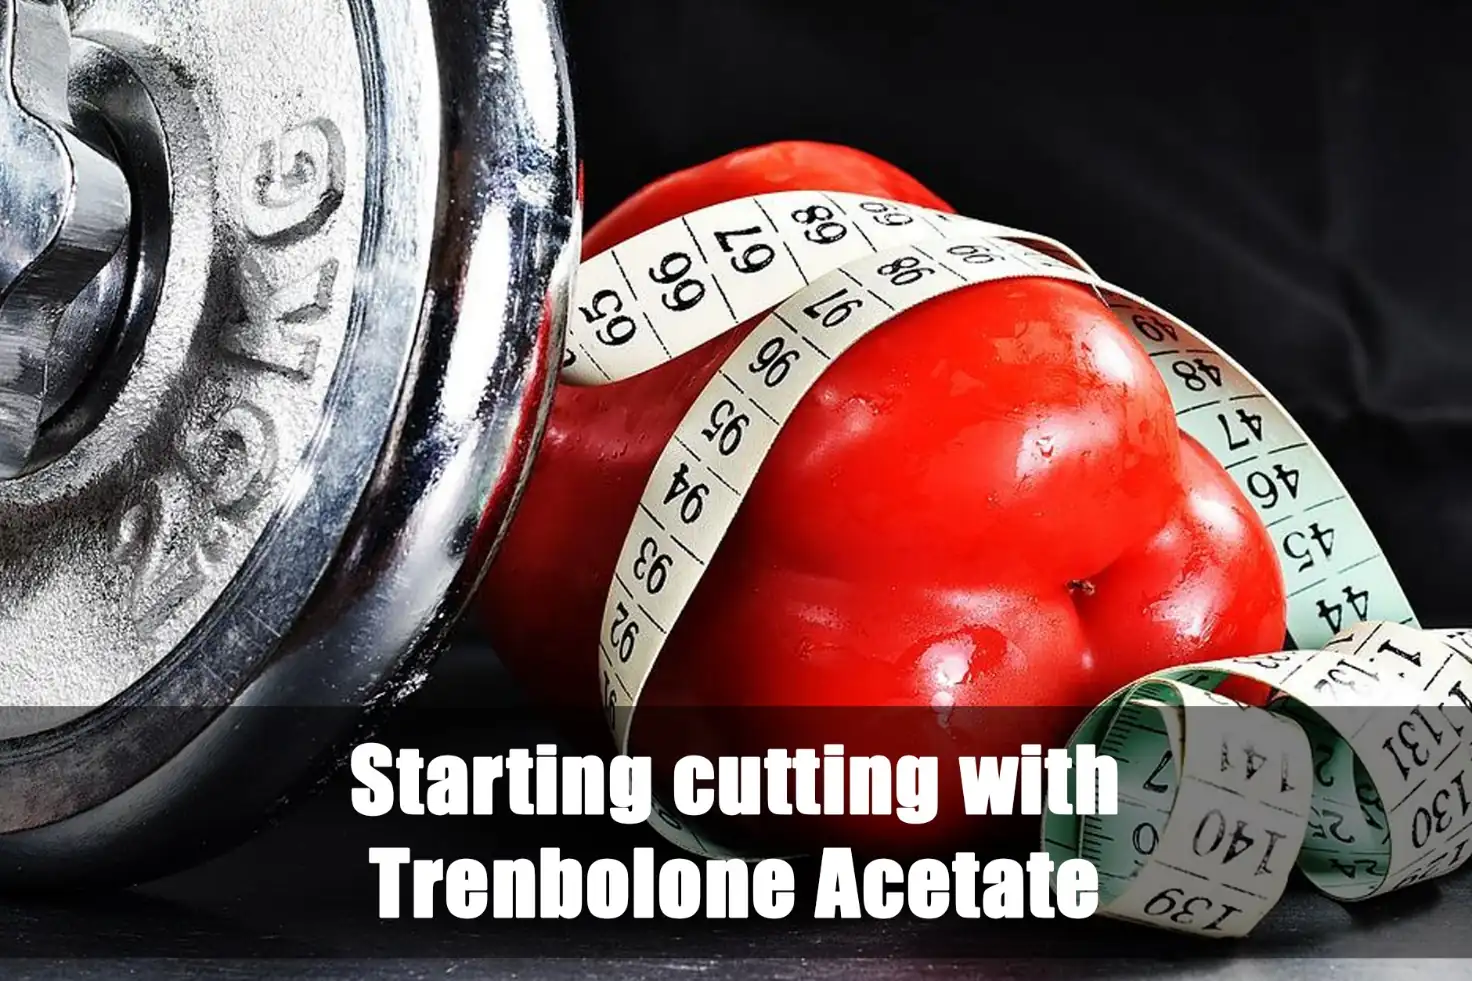 Start cutting with Trenbolone Acetate